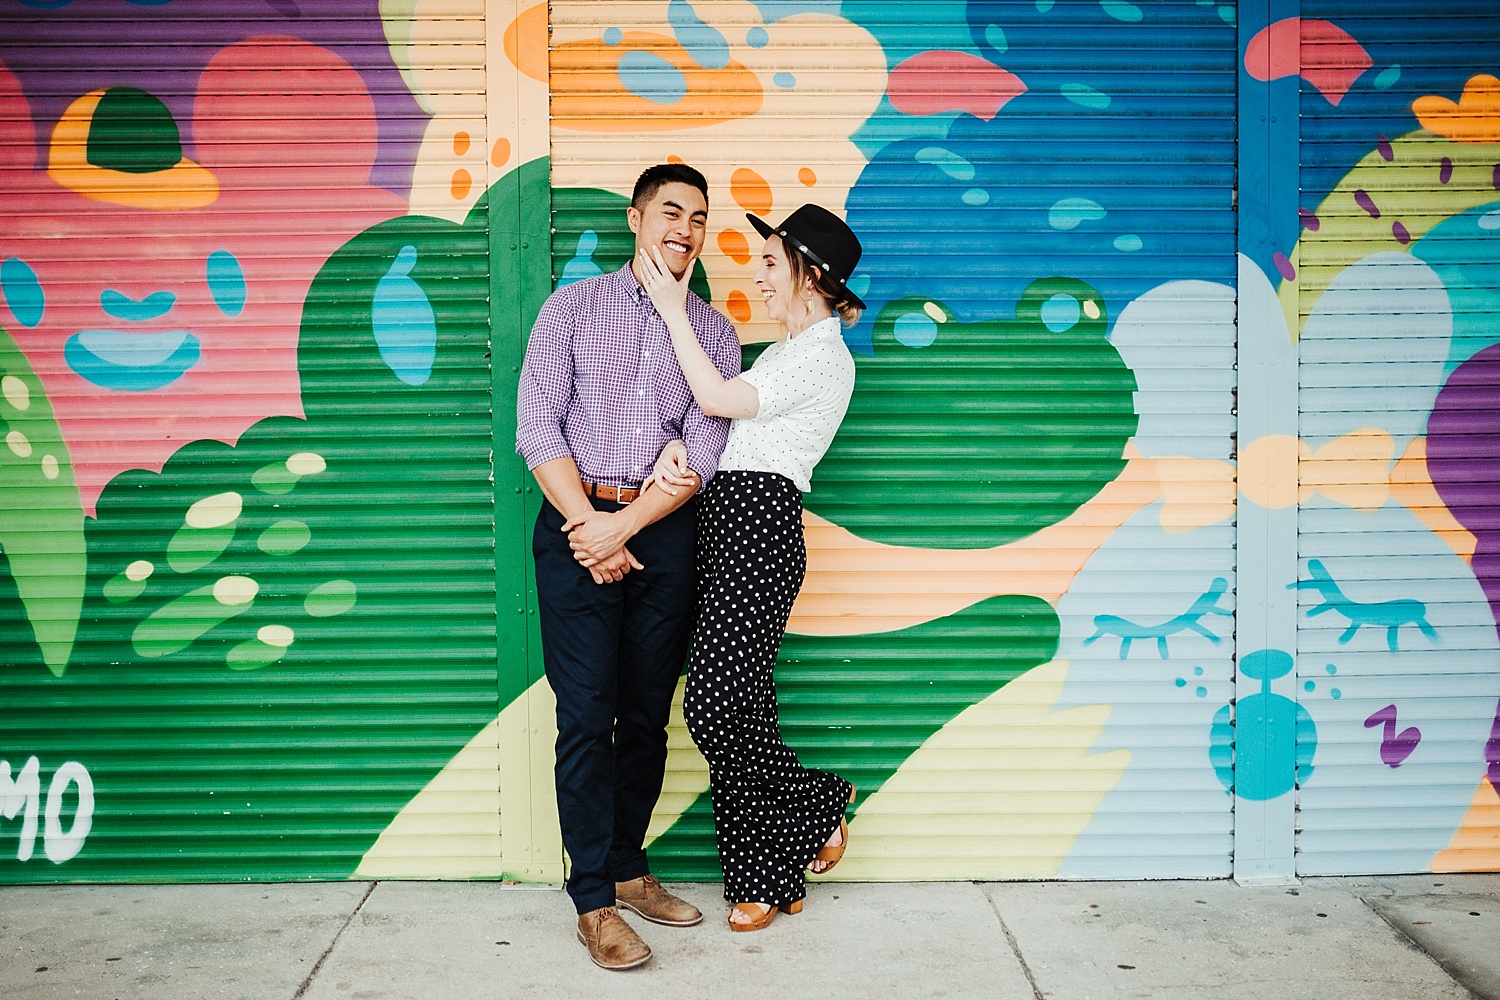 tampa heights engagement session, tampa heights engagement photos, fancy free engagement session, cavu tampa photos, tampa engagement photo ideas, tampa engagement photographer, tampa wedding photographer, Ashley izquierdo, tampa wedding photographers, Tampa wedding photos, tampa hipster engagement sessions, best tampa photographers